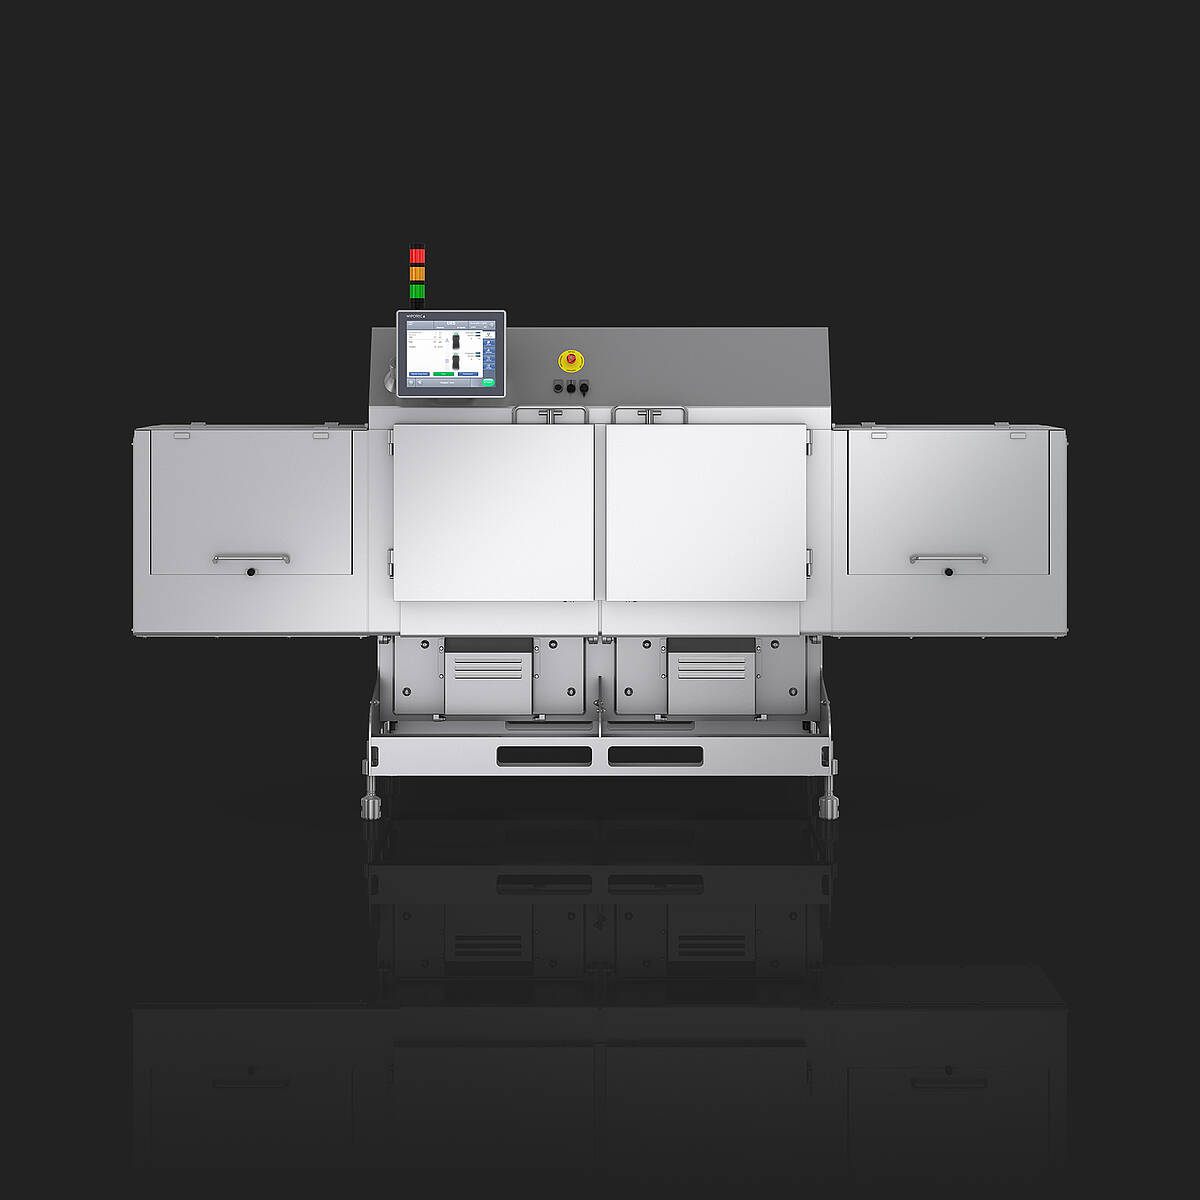 [Bitte in "USA" übersetzen:] X-ray inspection system dualview SC-S 5020 front view